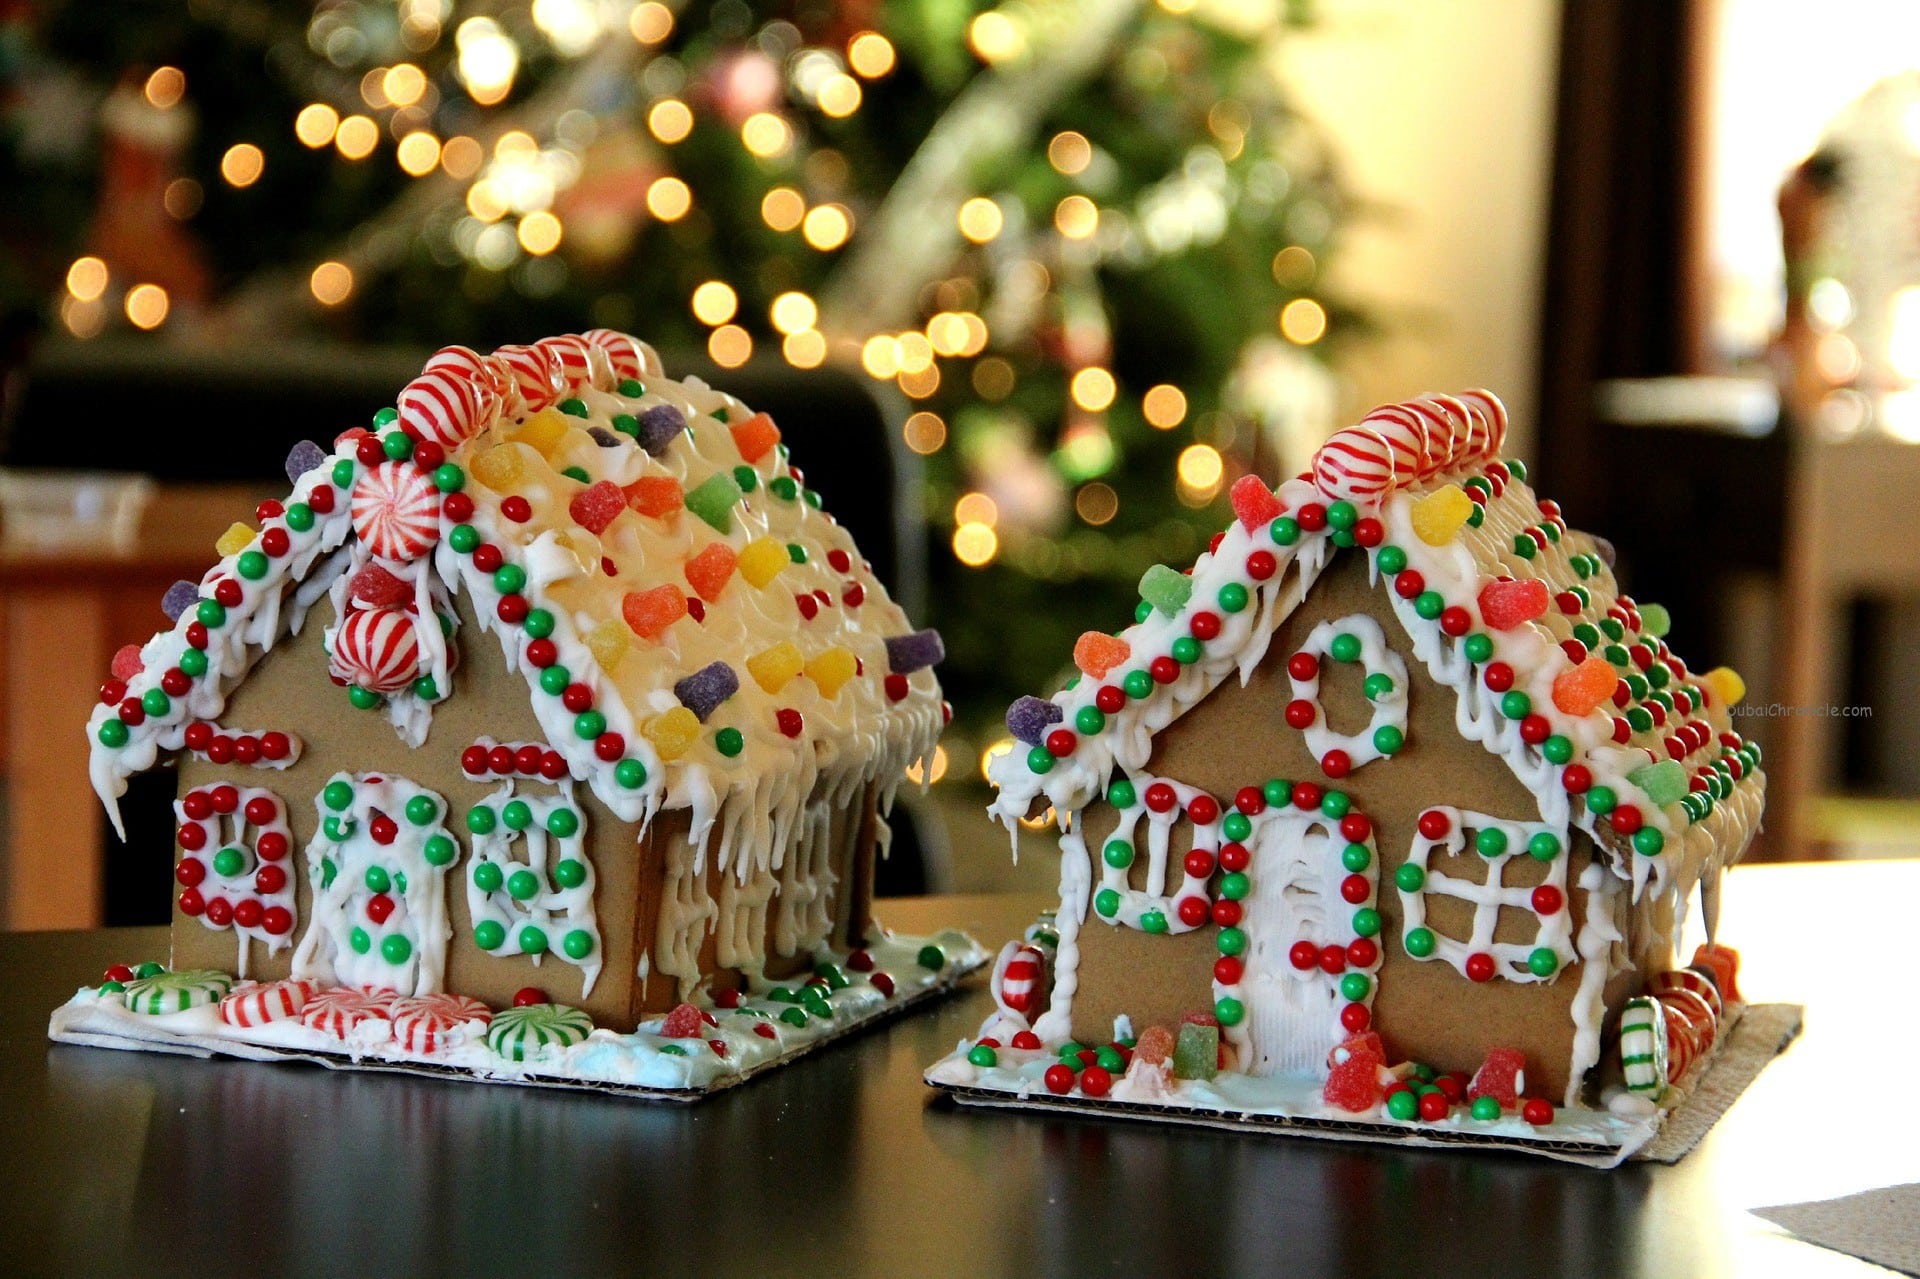 gingerbread-house-286157_1920